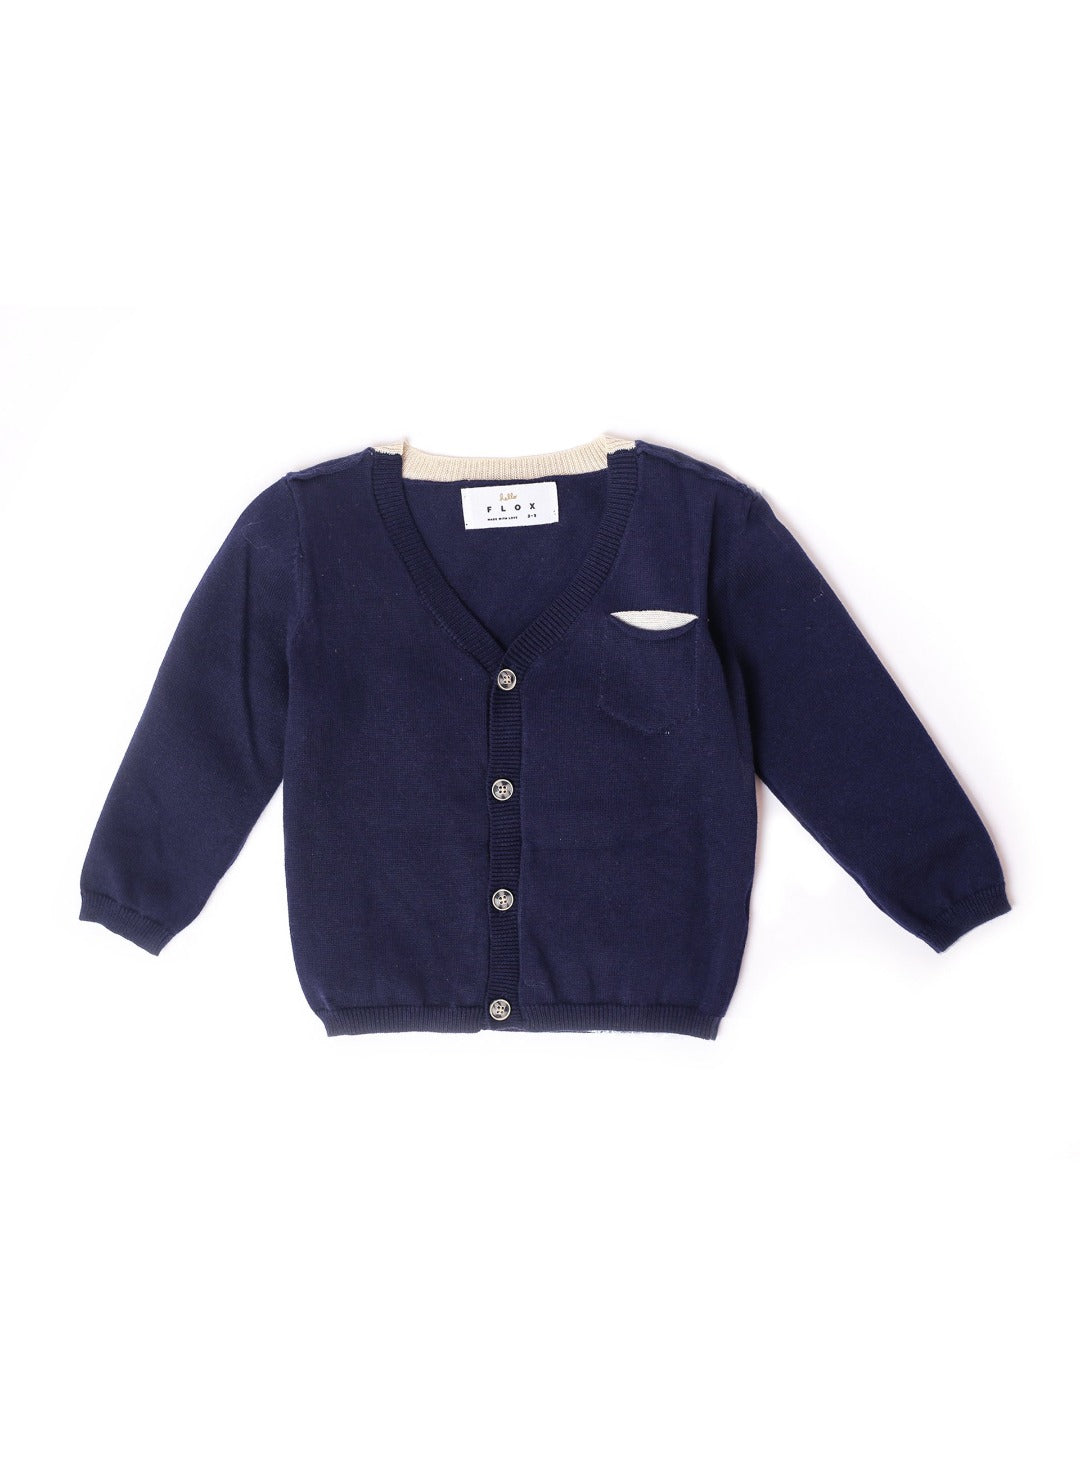 navy blue cardigan with elbow patch accent